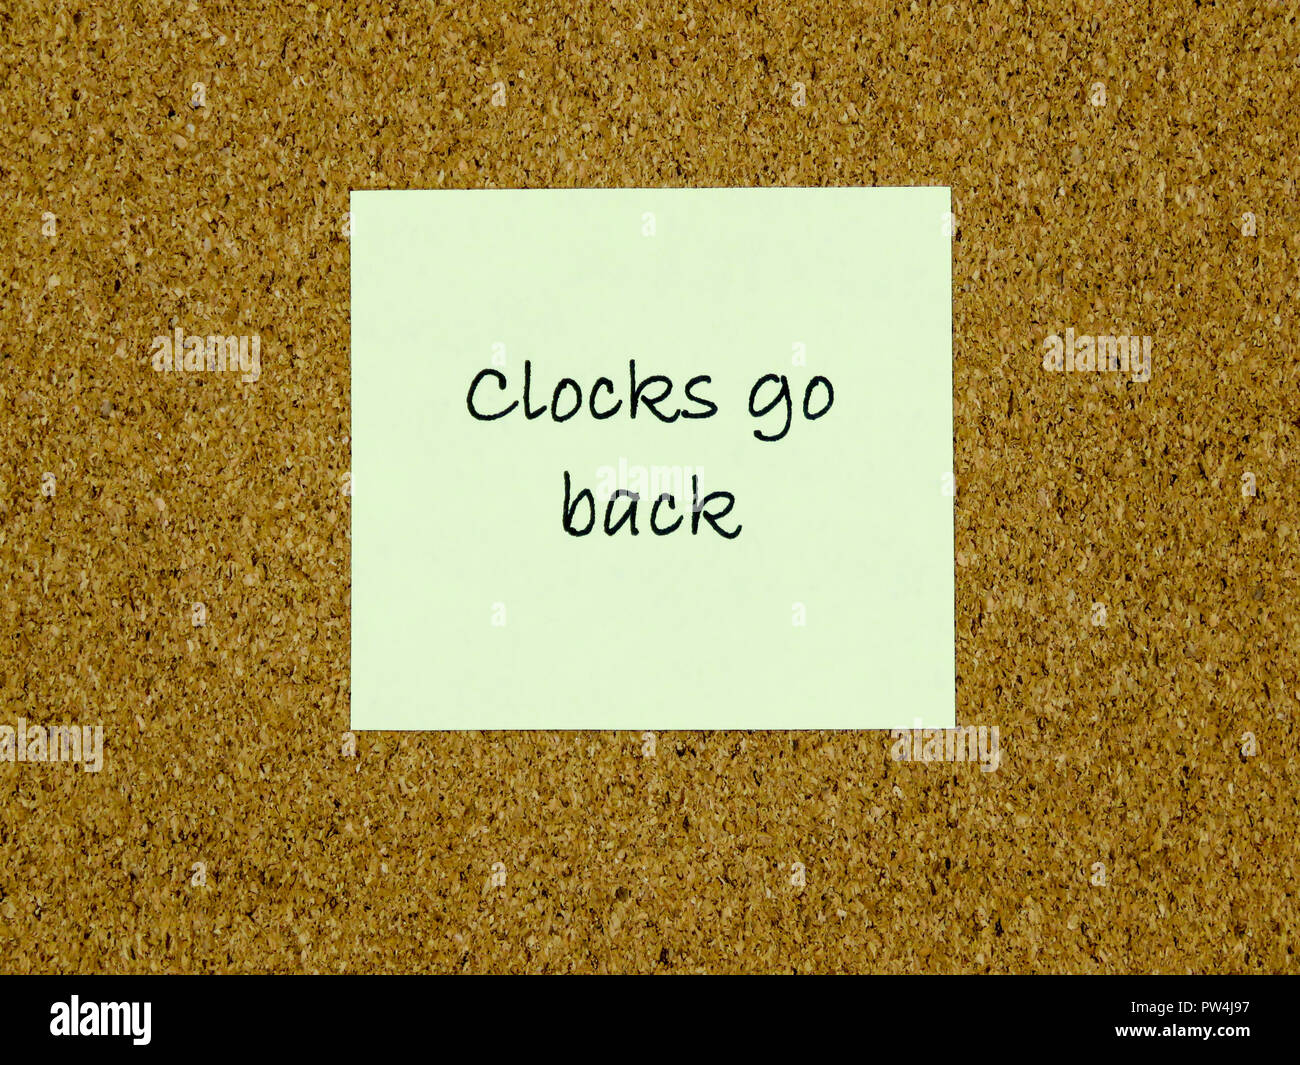 A yellow sticky note with clocks go back written on it on a cork board background Stock Photo